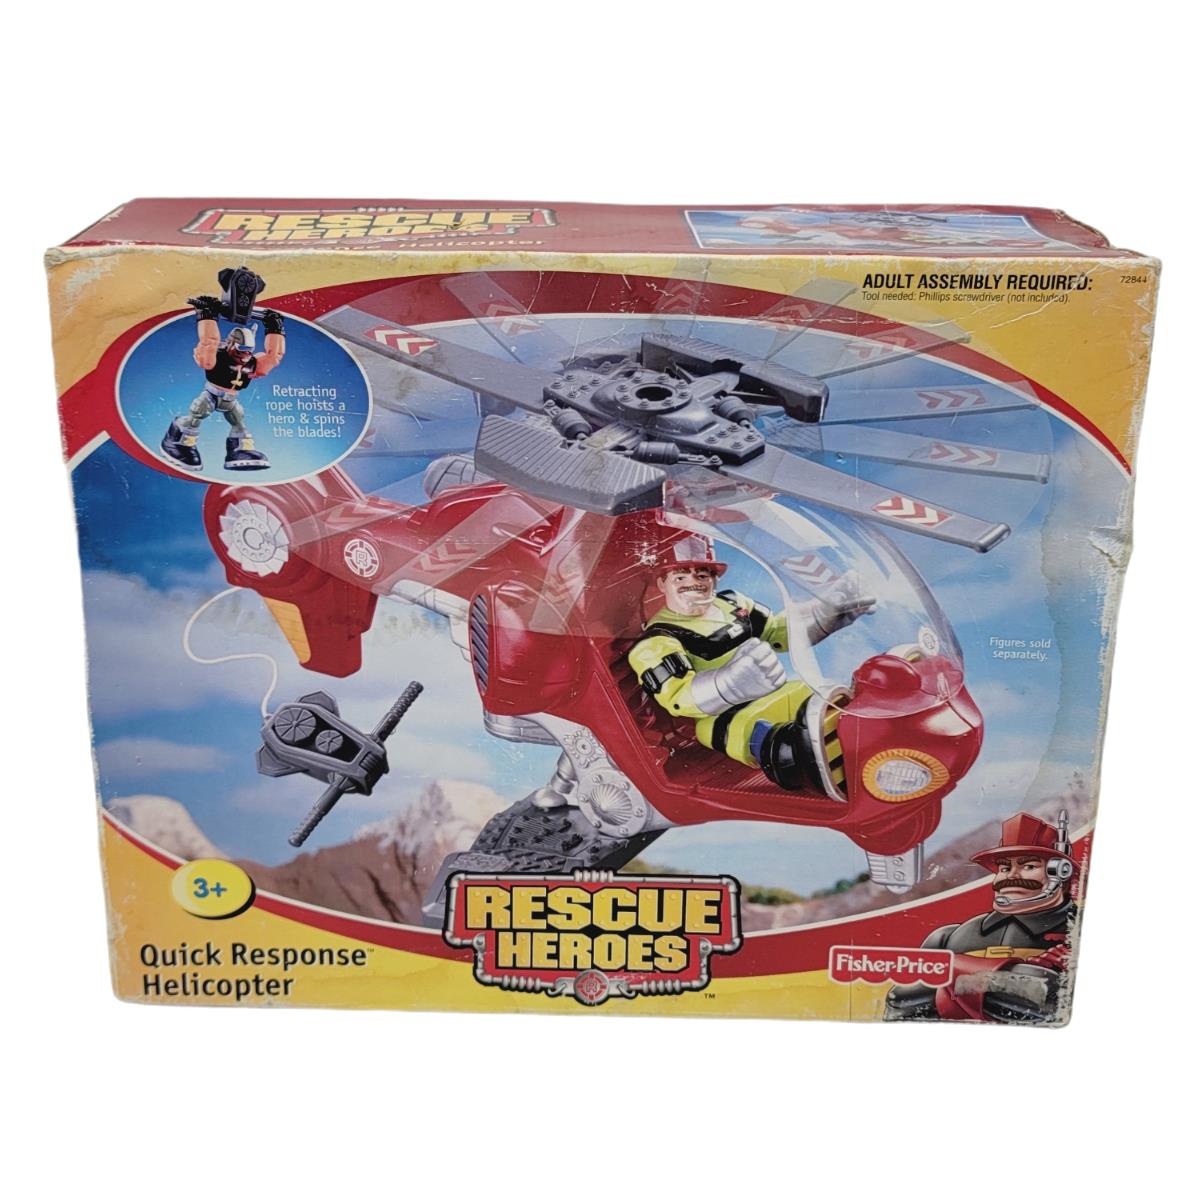 Rescue Heroes Quick Response Fire Helicopter Fisher Price 2001 Age 3+